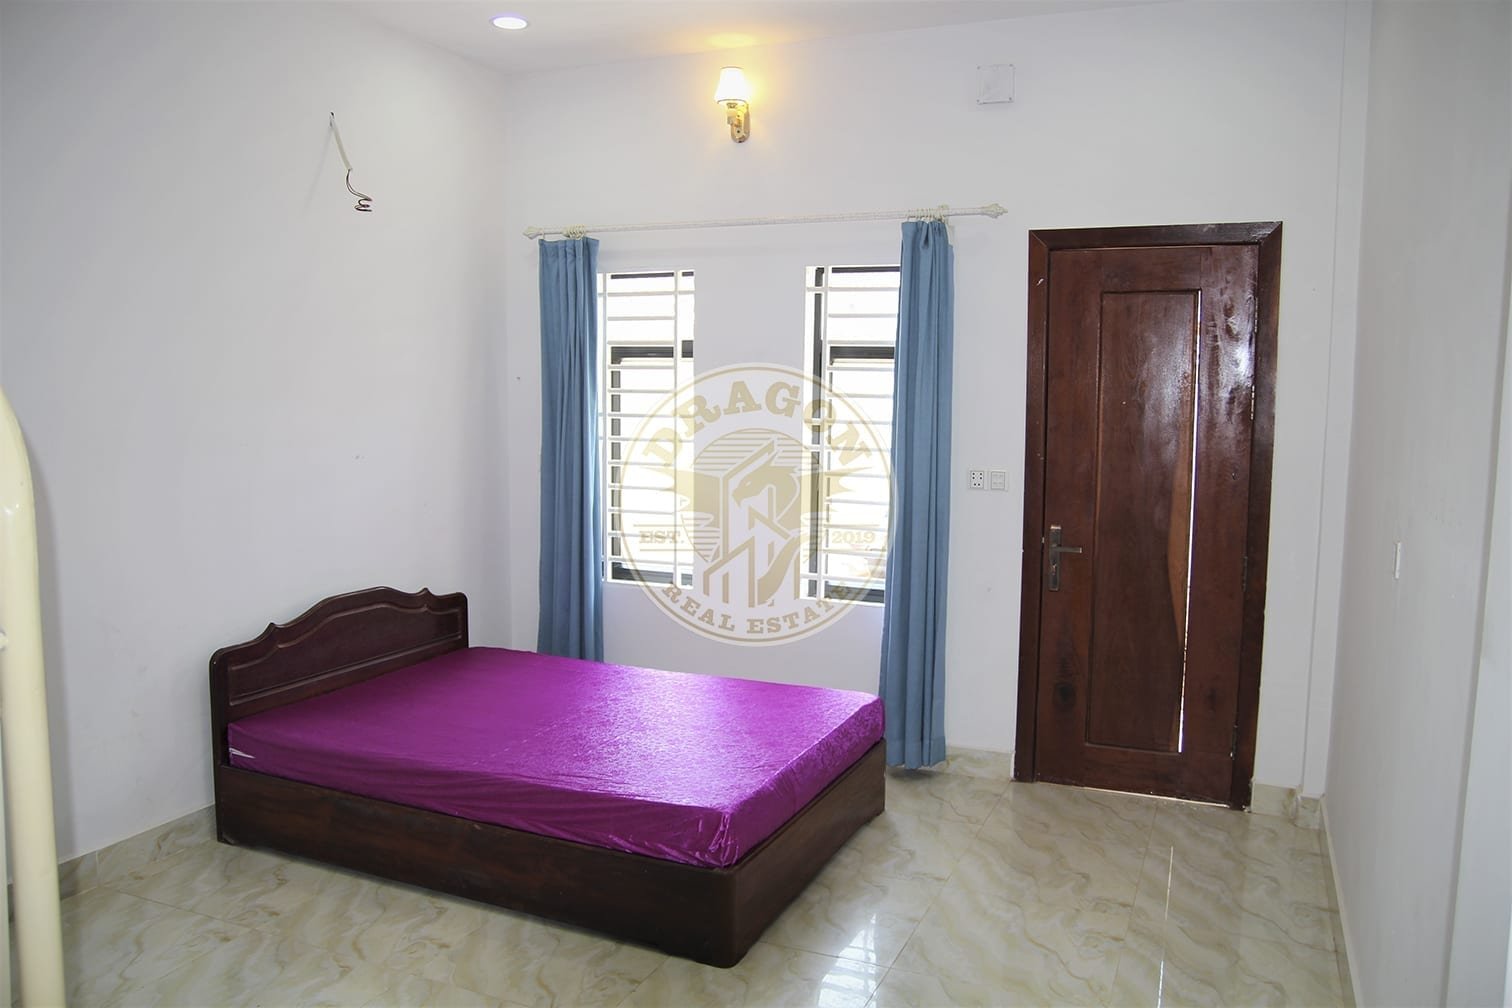 Affordable Studio for Rent. Sihanoukville Cambodia Property Sale